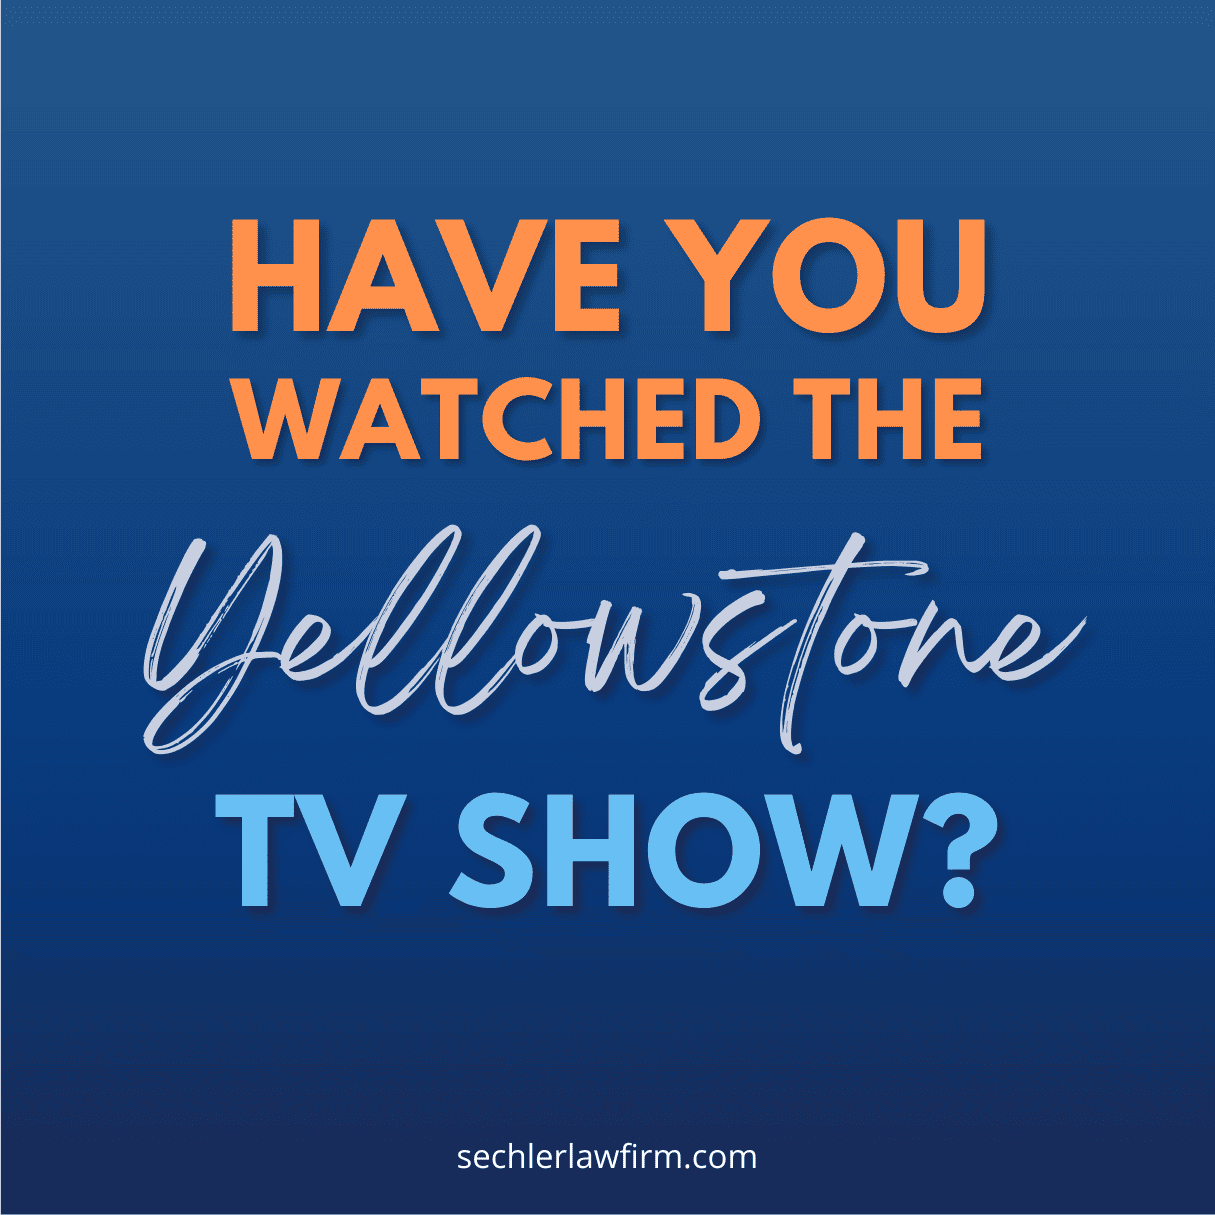 The Yellowstone TV Show